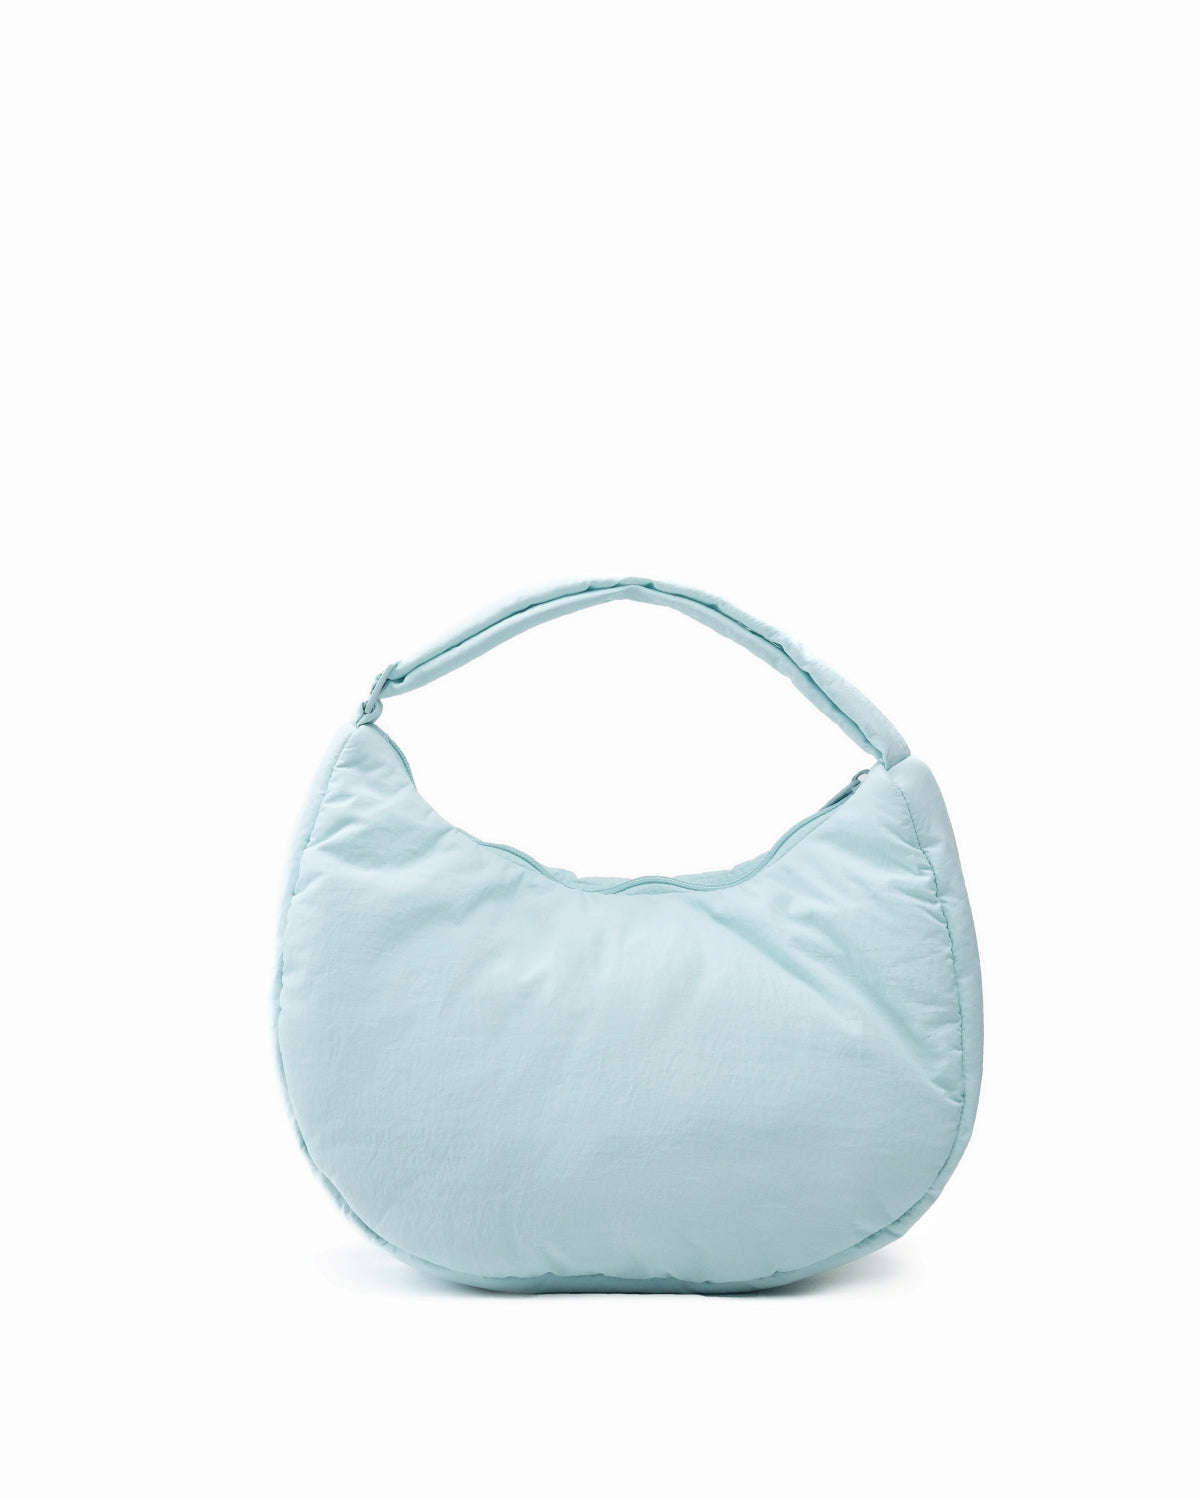 COSY FORTUNE COOKIE BAG IN MINT